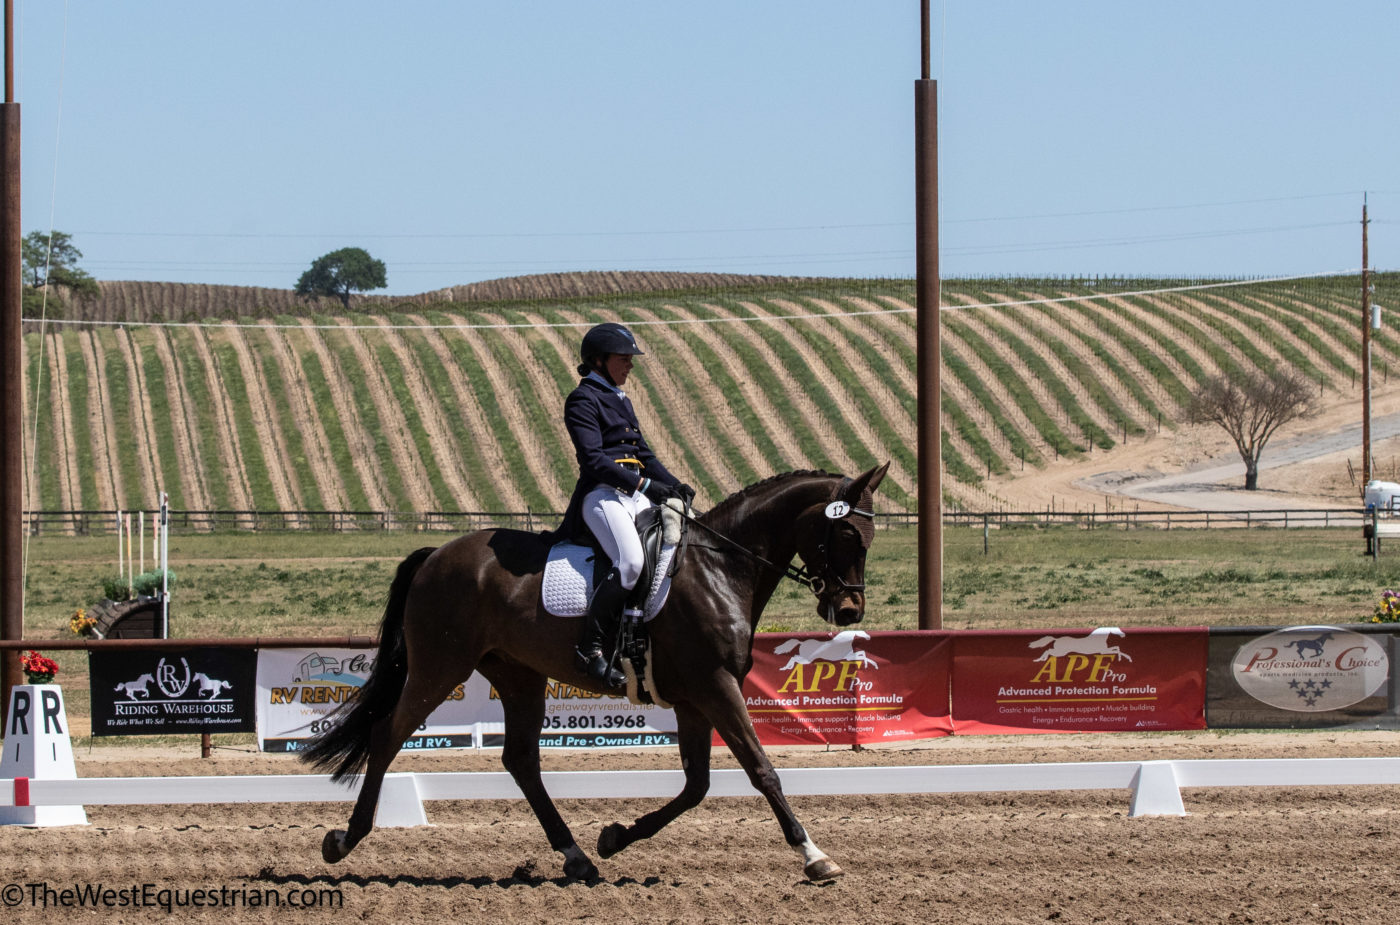 Sabrina Glaser and Cooley Mr. Murphy were in second after dressage in the CCI3*-S. TheWestEquestrian.com Photo.